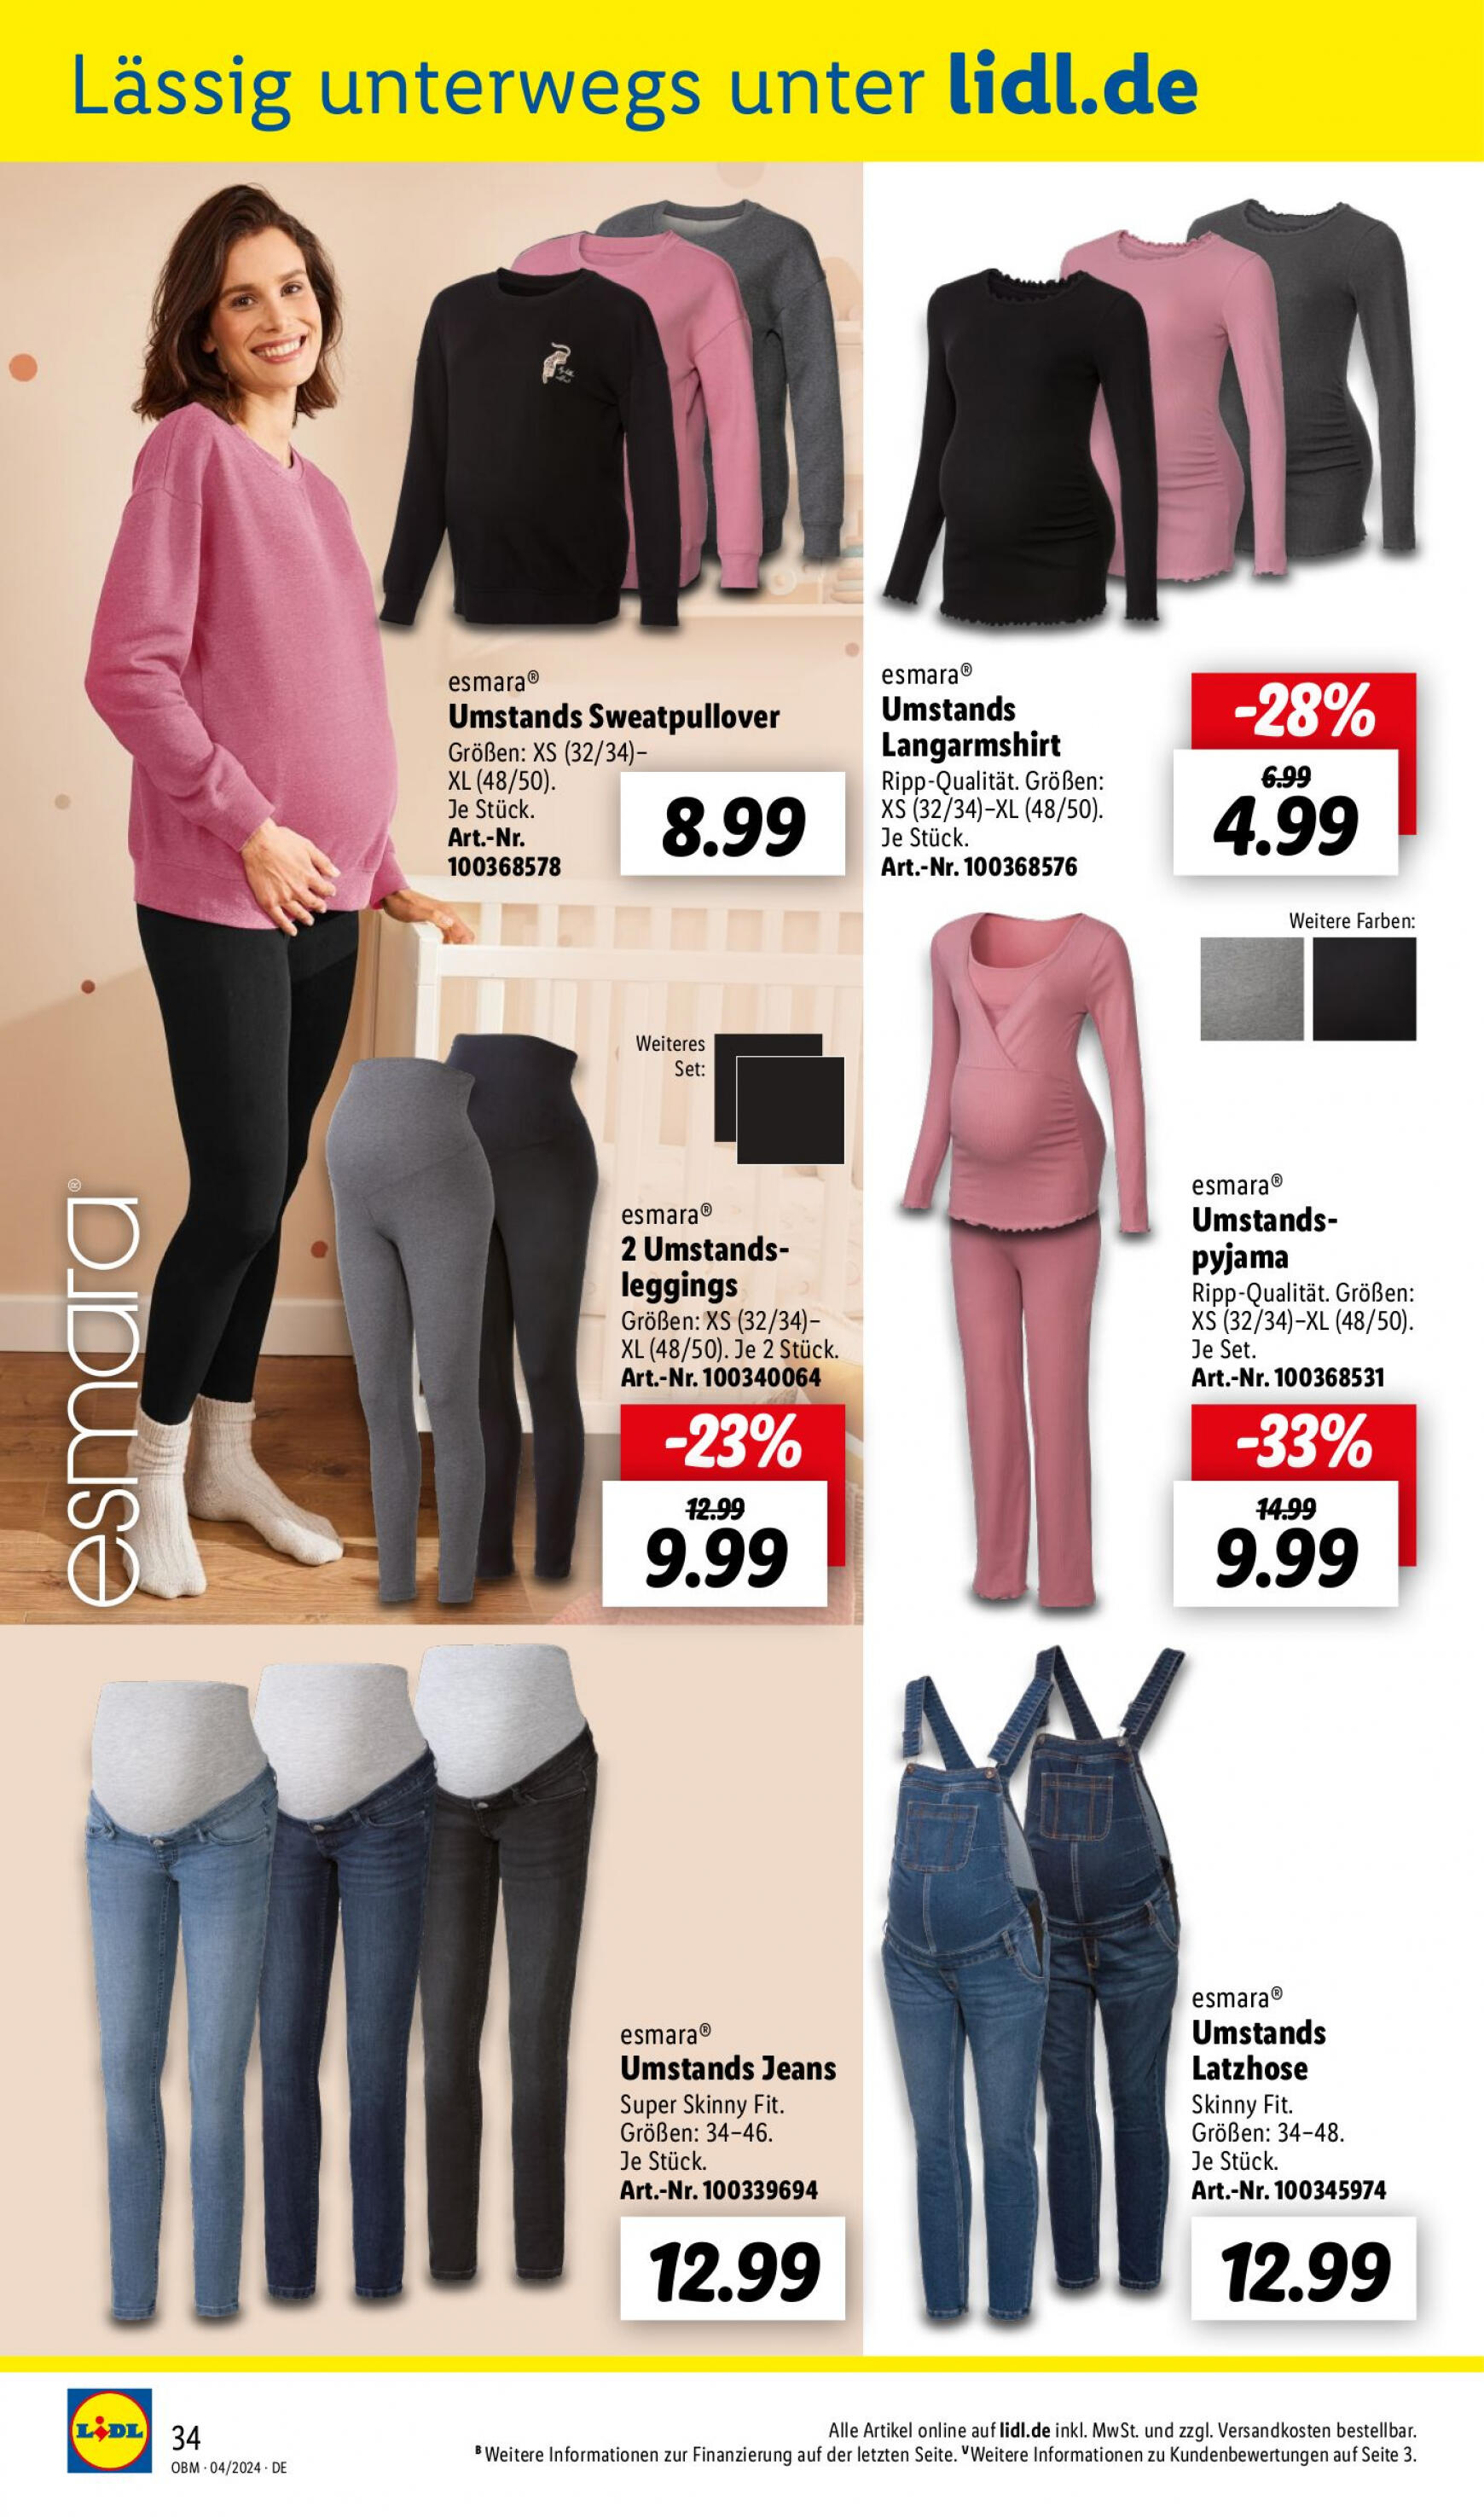 lidl - Flyer Lidl - Aktuelle Onlineshop-Highlights aktuell 01.04. - 30.04. - page: 34